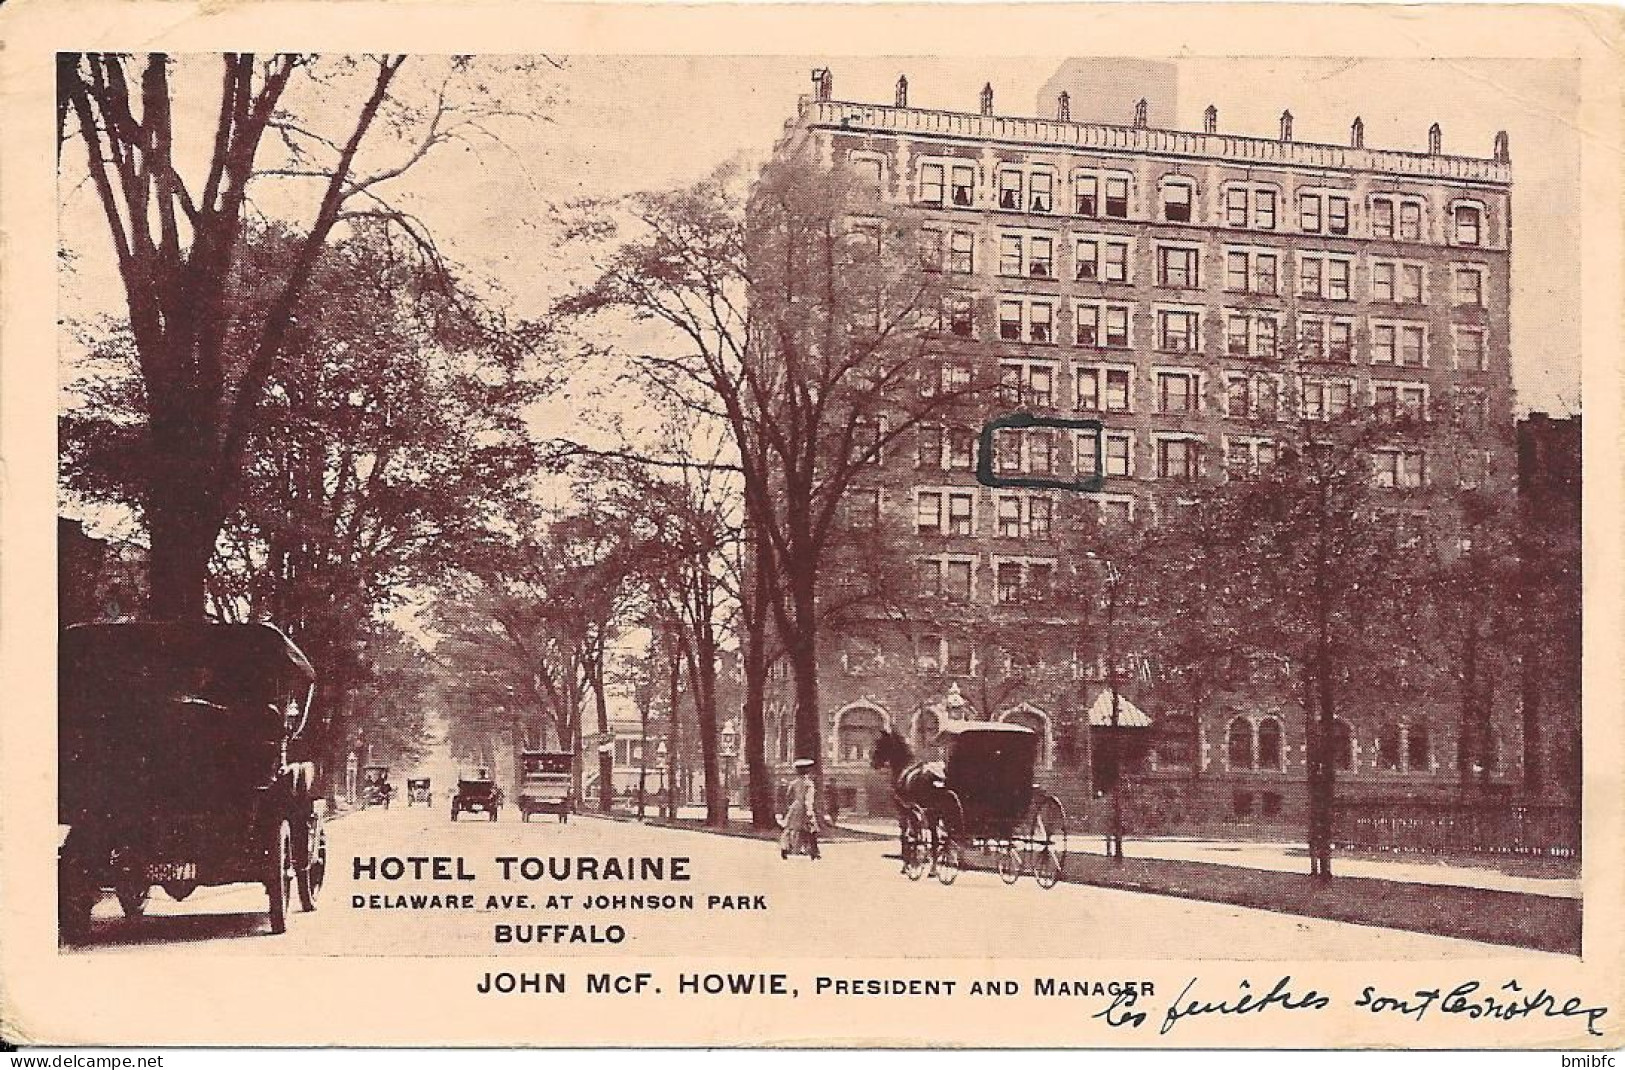 HOTEL TOURAINE - Delaware Ave, At Johnson Park - BUFFALO - JOHN McF. HOWIE, President And Manager - Buffalo